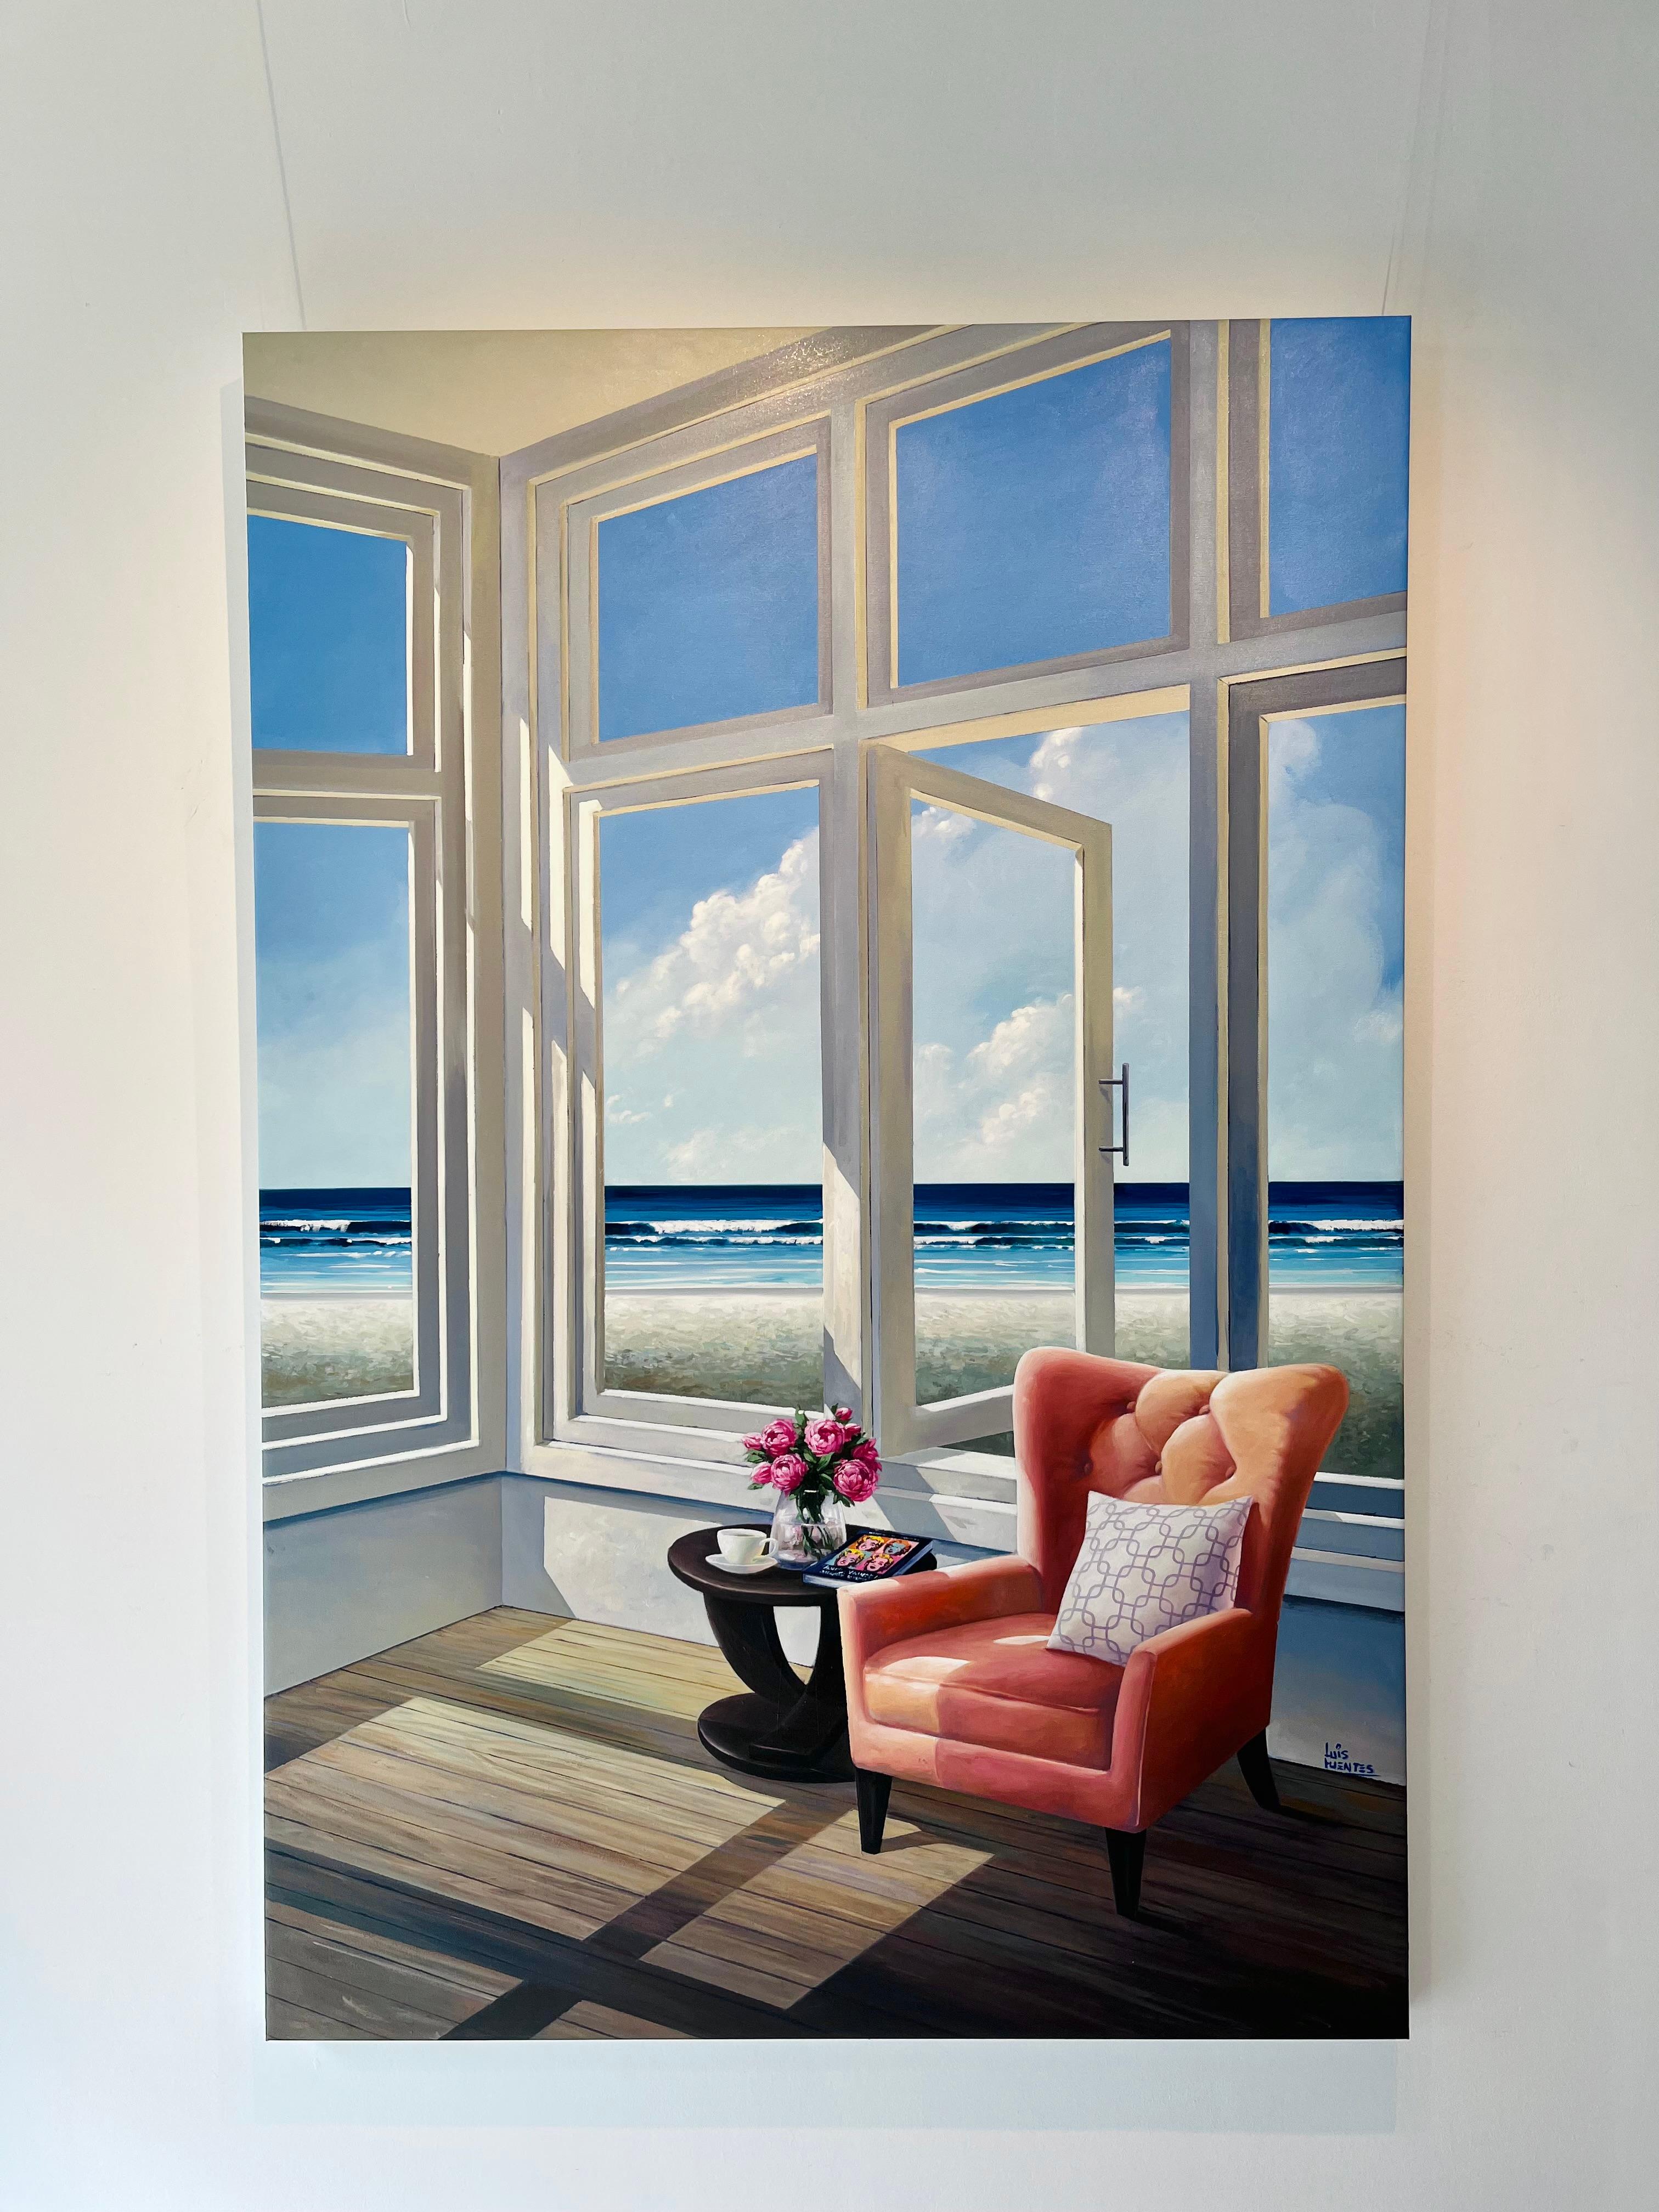 Beyond Tranquility-original still life-seascape oil painting-contemporary Art - Painting by Luis Fuentes